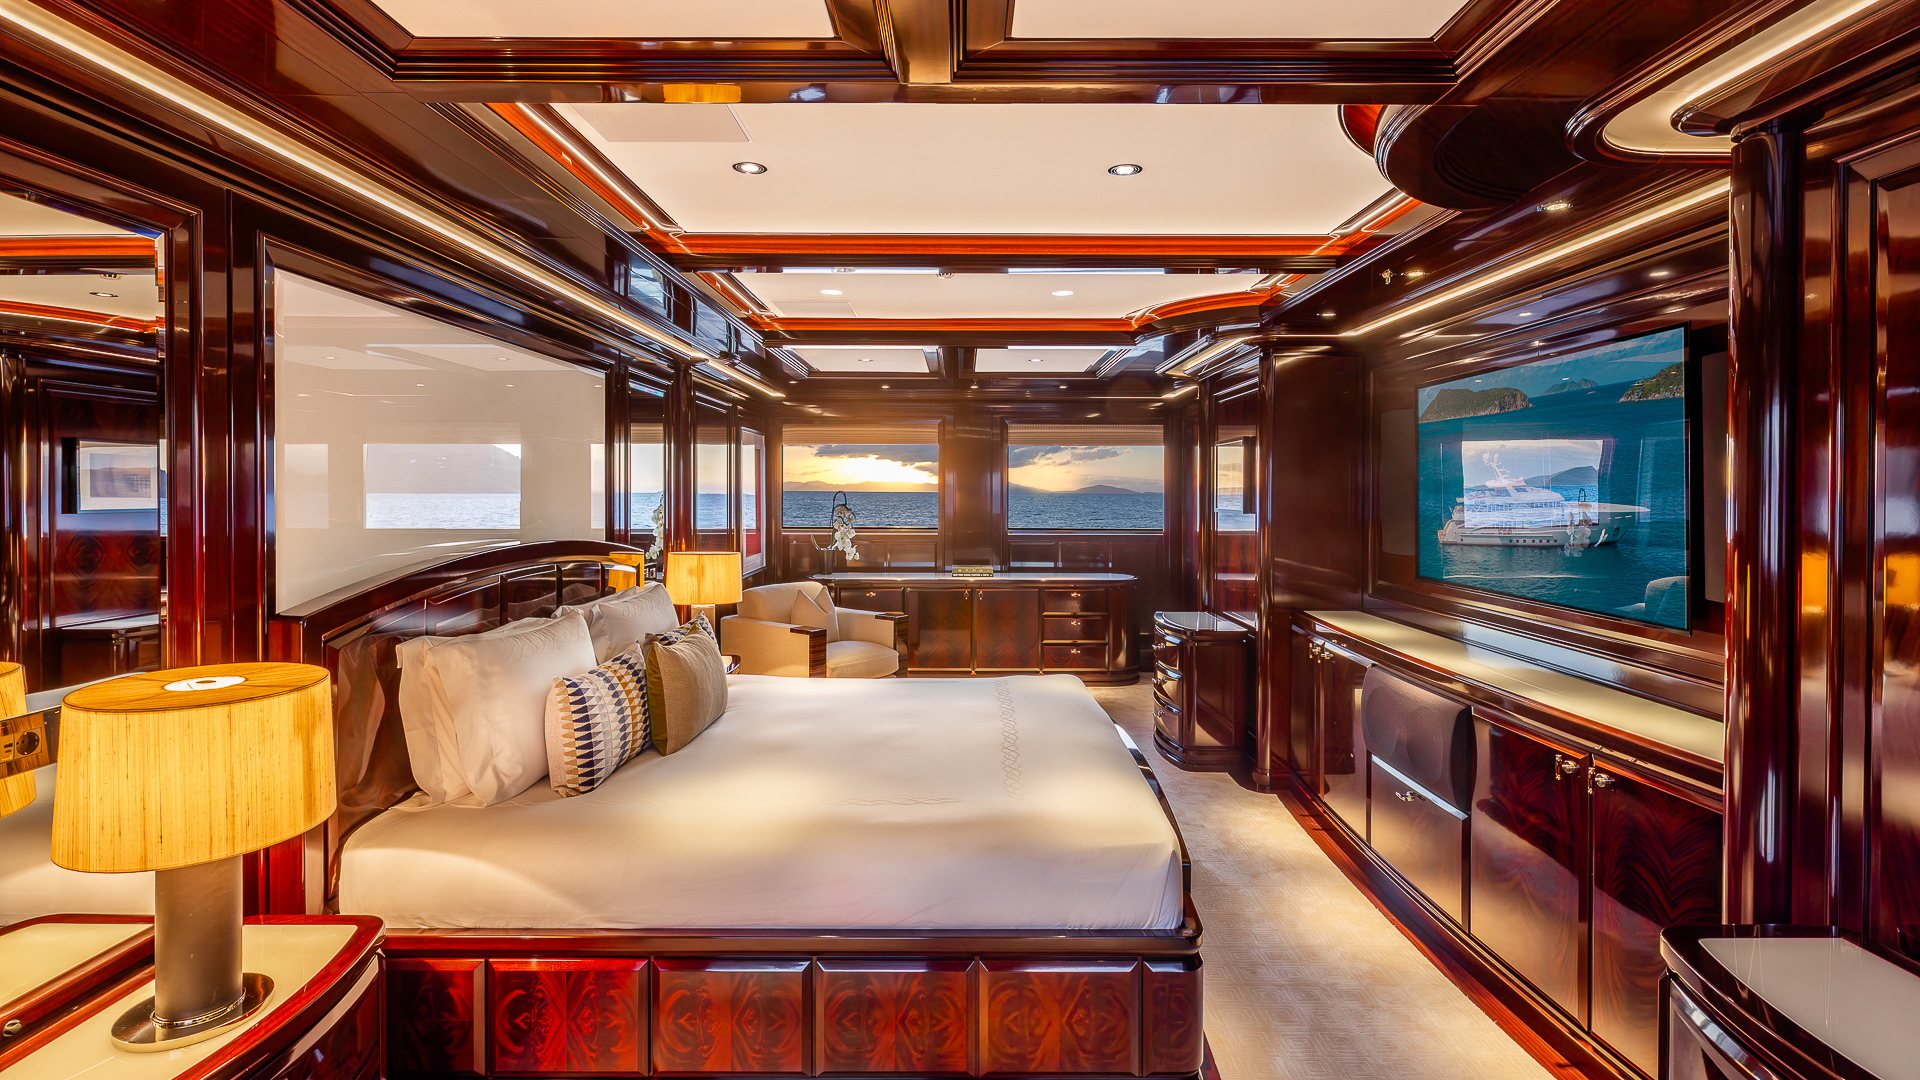 Rock It Master King Suite On The Main Deck Forward Credit Yachting Image